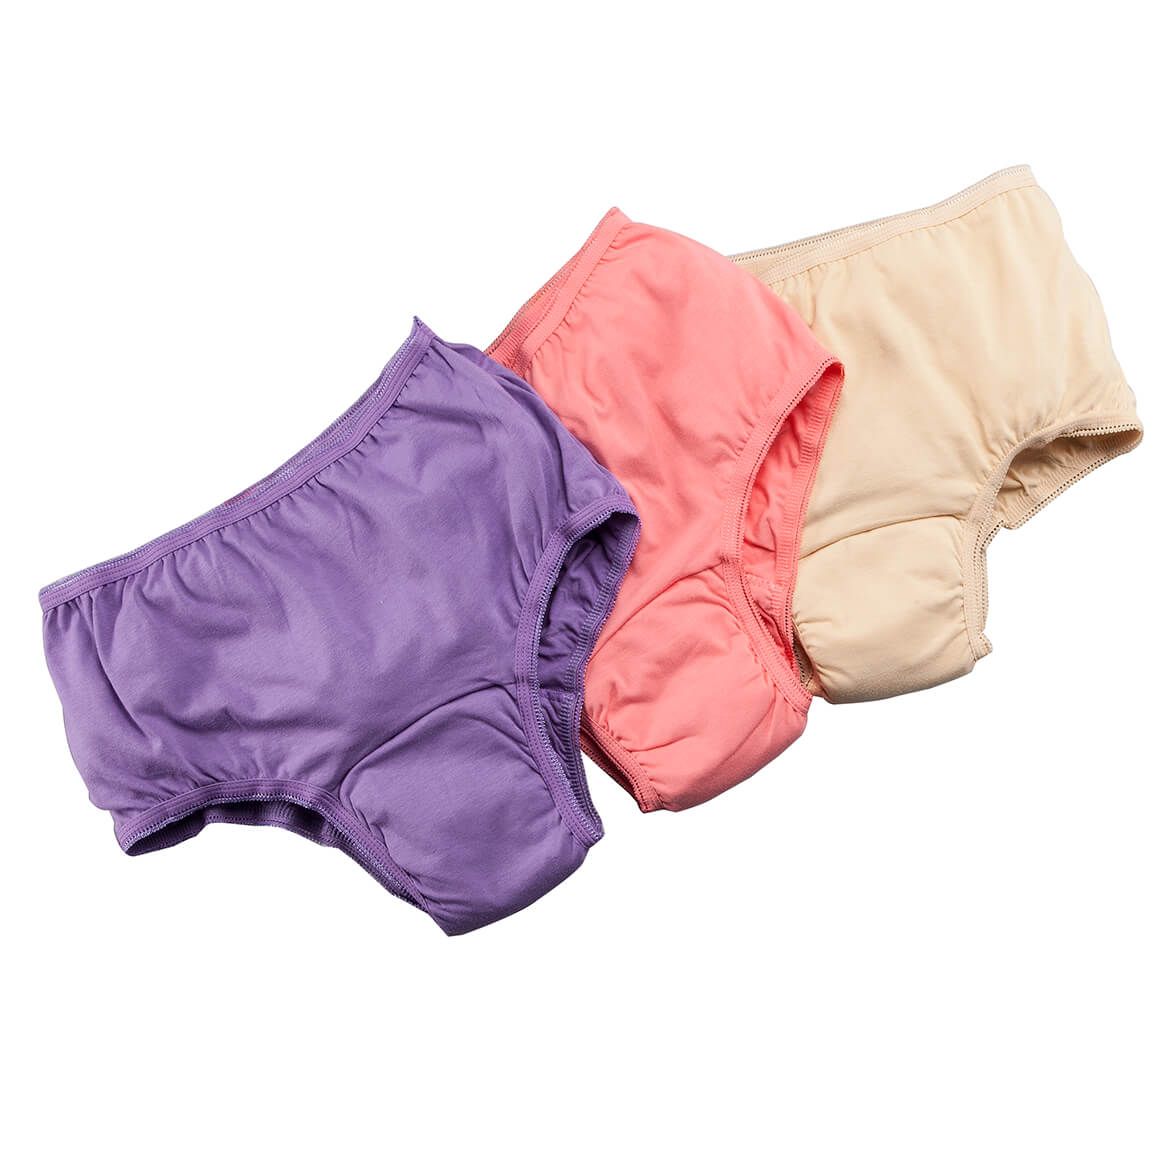 Women's 20 oz. Incontinence Briefs Assorted Colors, Set of 3 + '-' + 362413